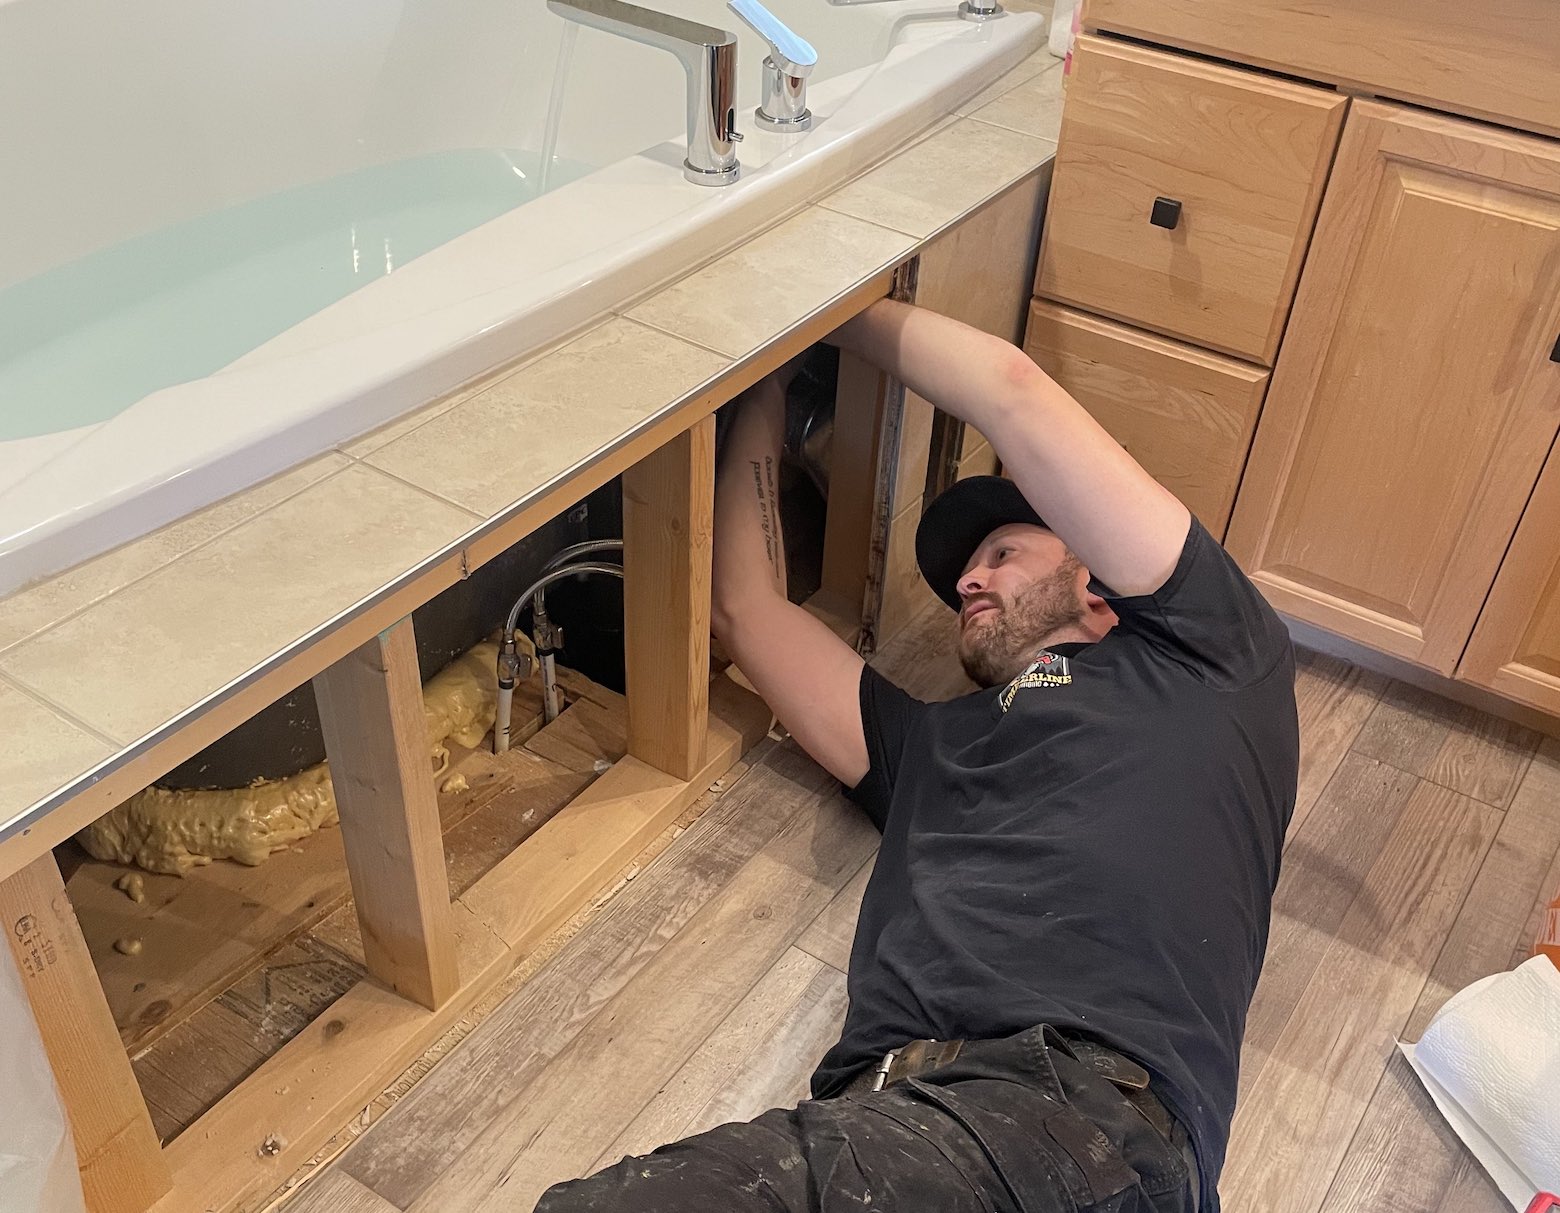 Troy fixing the plumbing of an ensuite bathtub